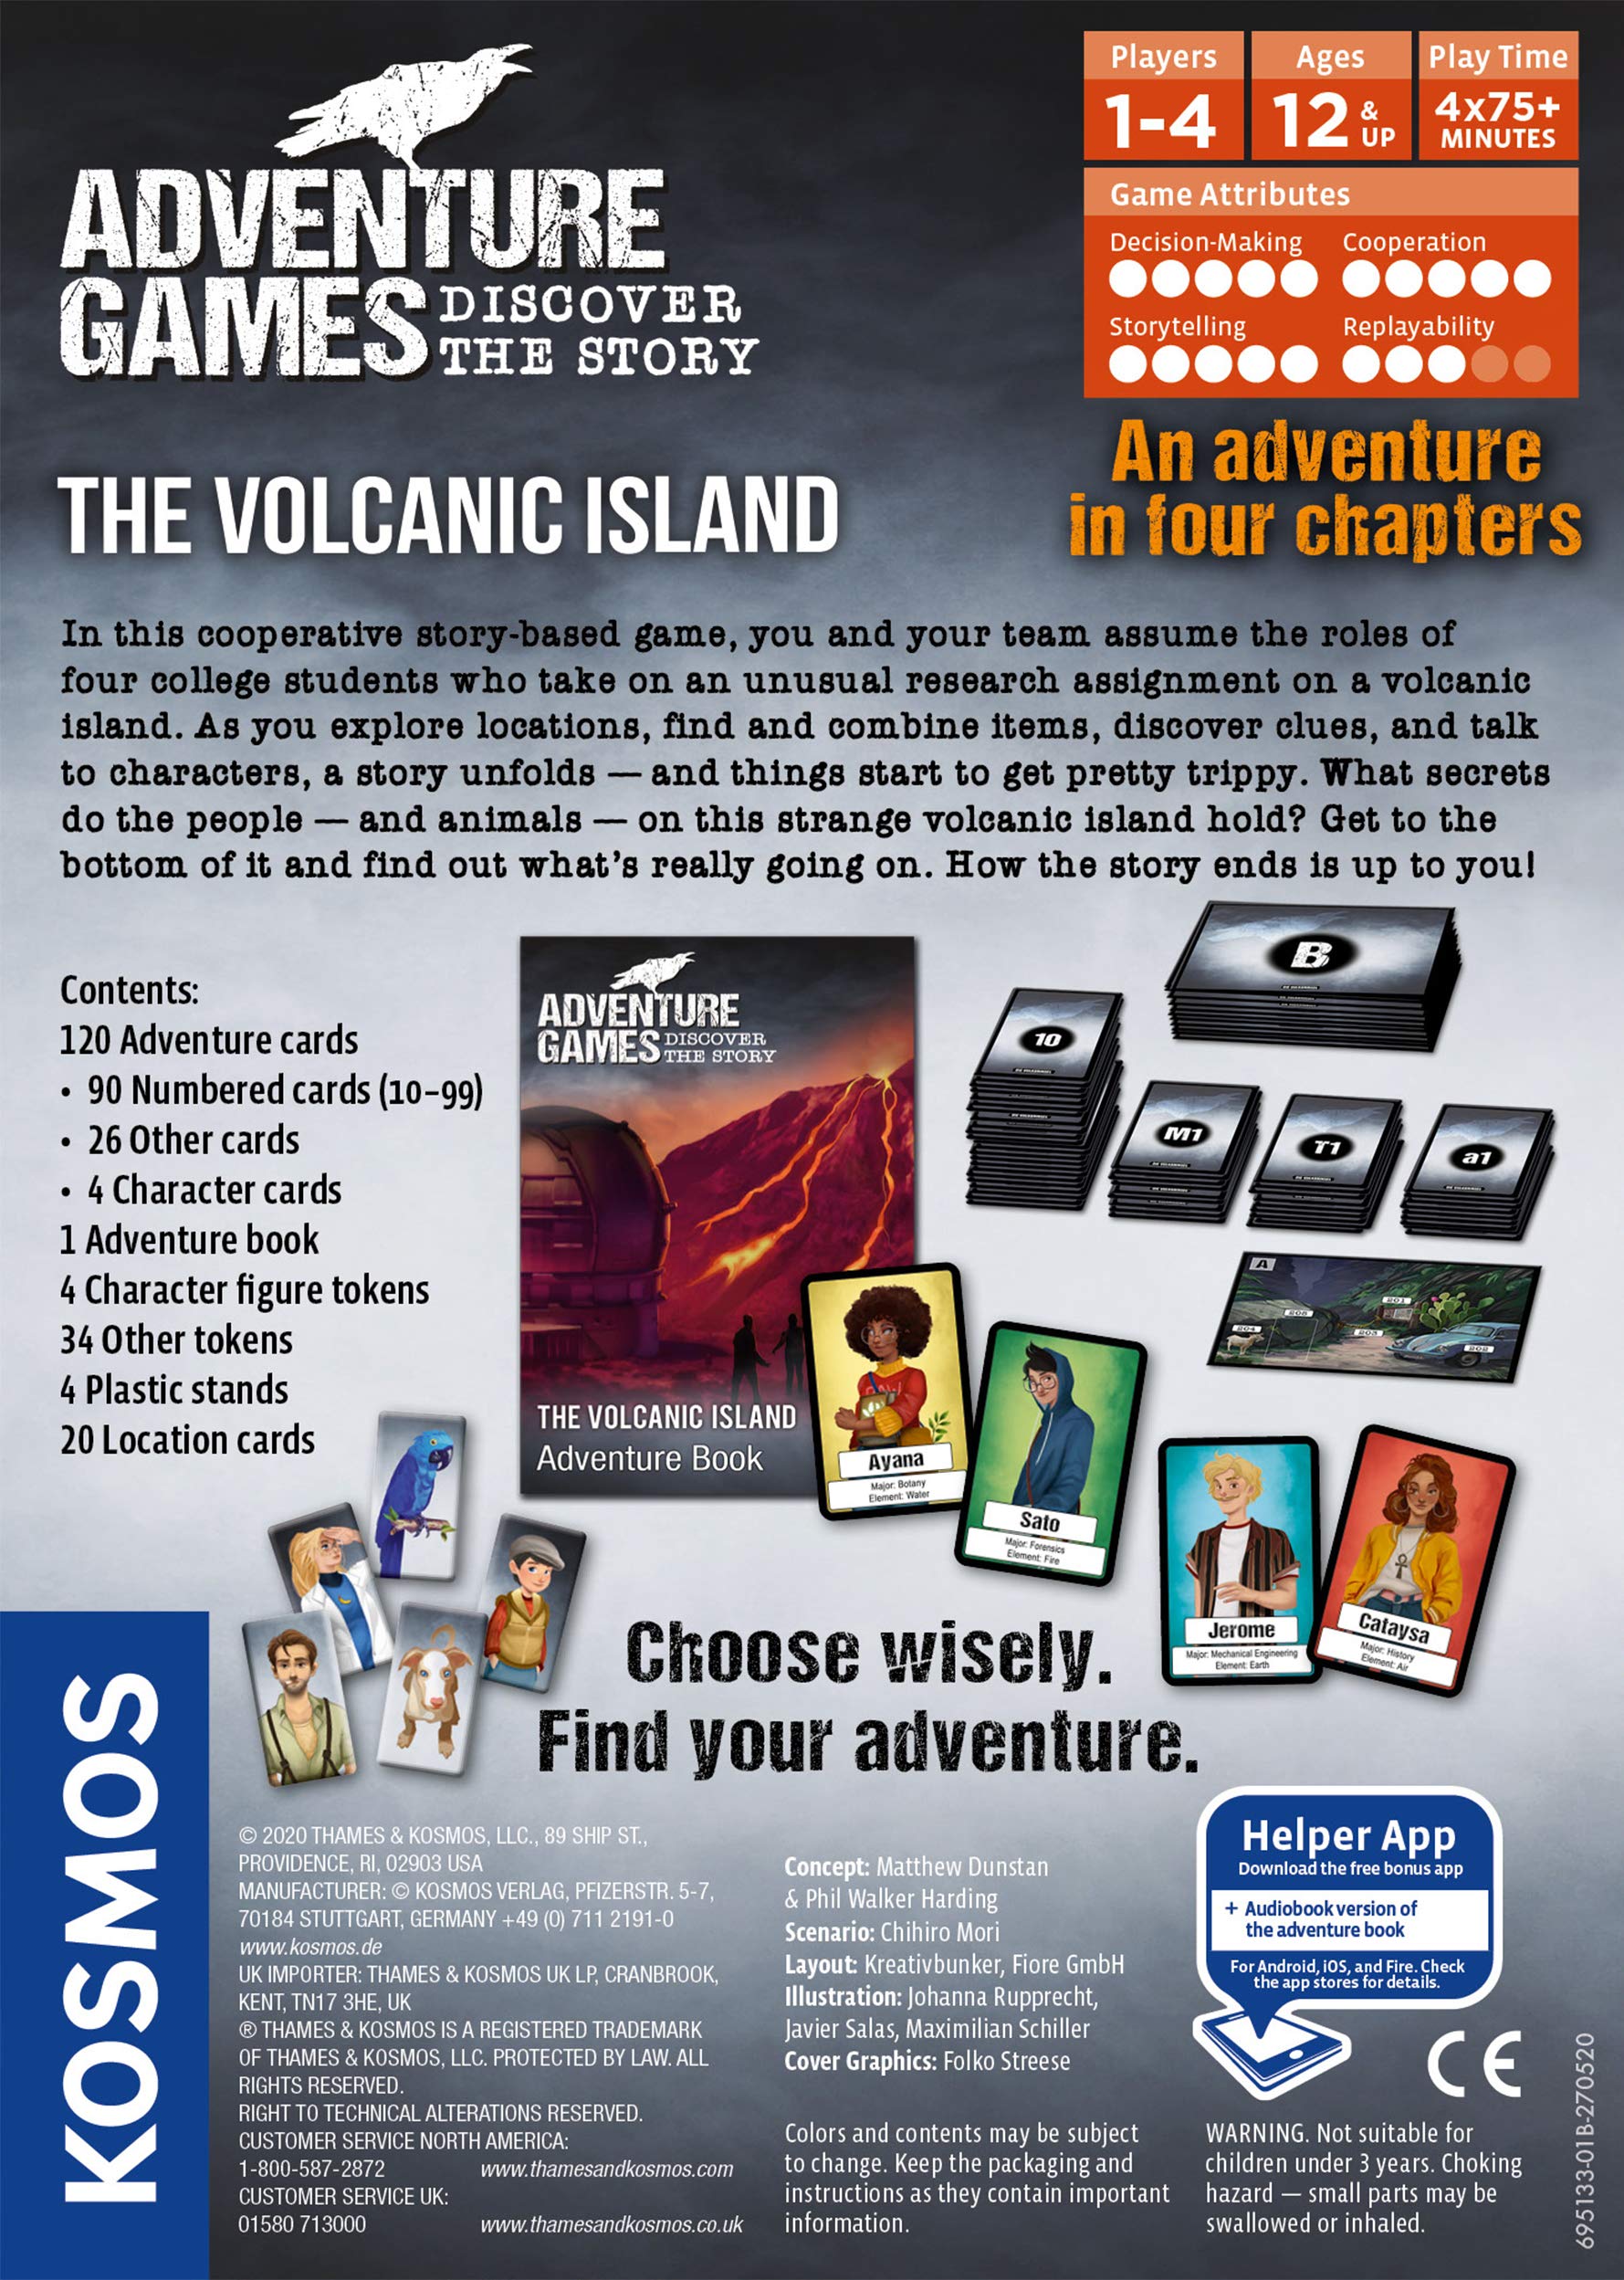 Adventure Games: The Volcanic Island | A Kosmos Game from Thames & Kosmos | Collaborative, Replayable Storytelling Game Experience for 1 to 4 Players | Ages 12+